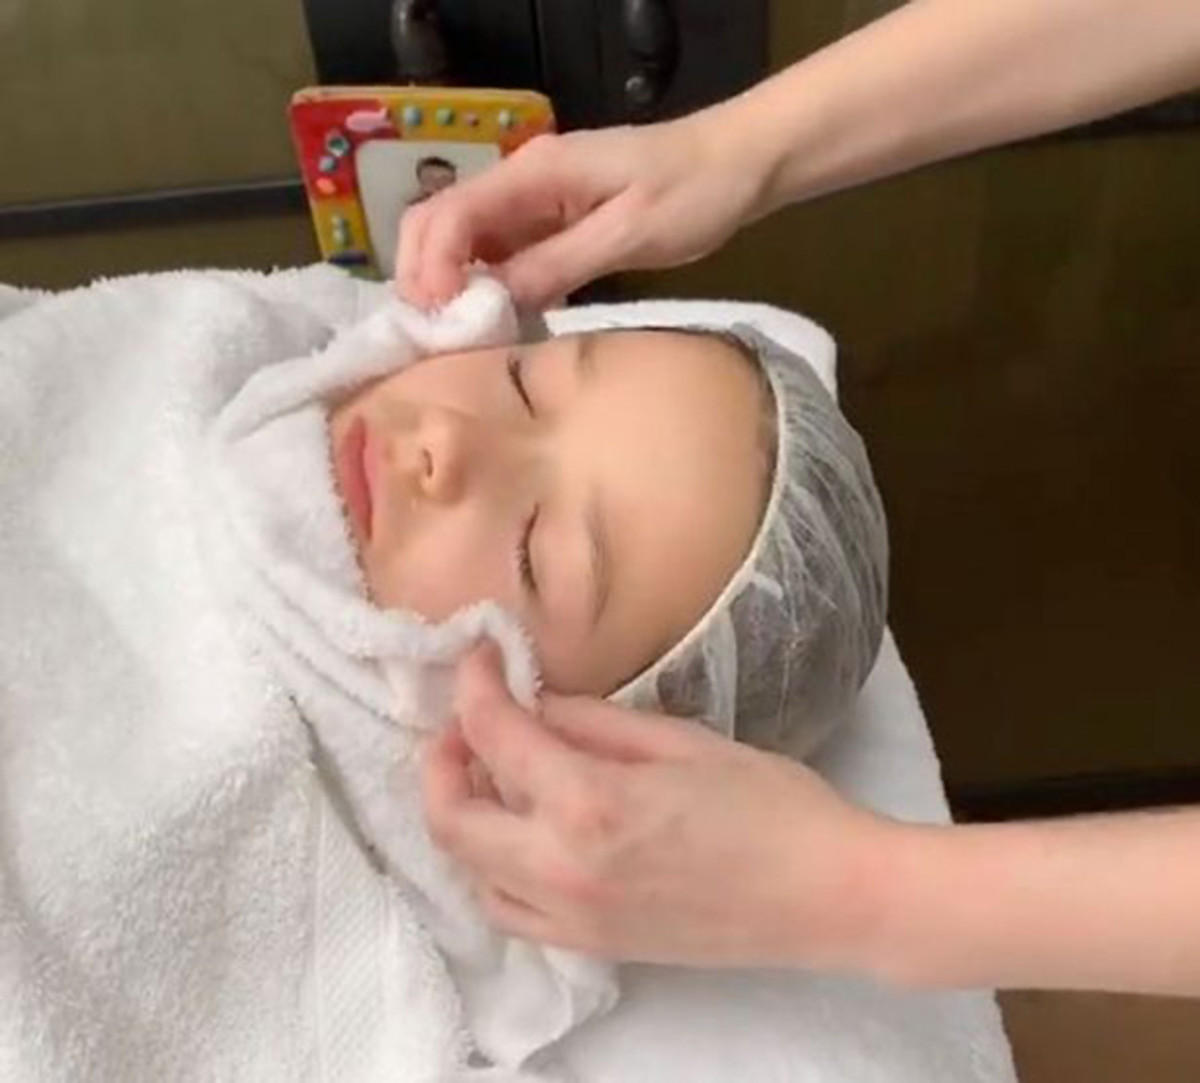 Harper Beckham, 7, during her "baby facial" with Dr. Barbara Sturm